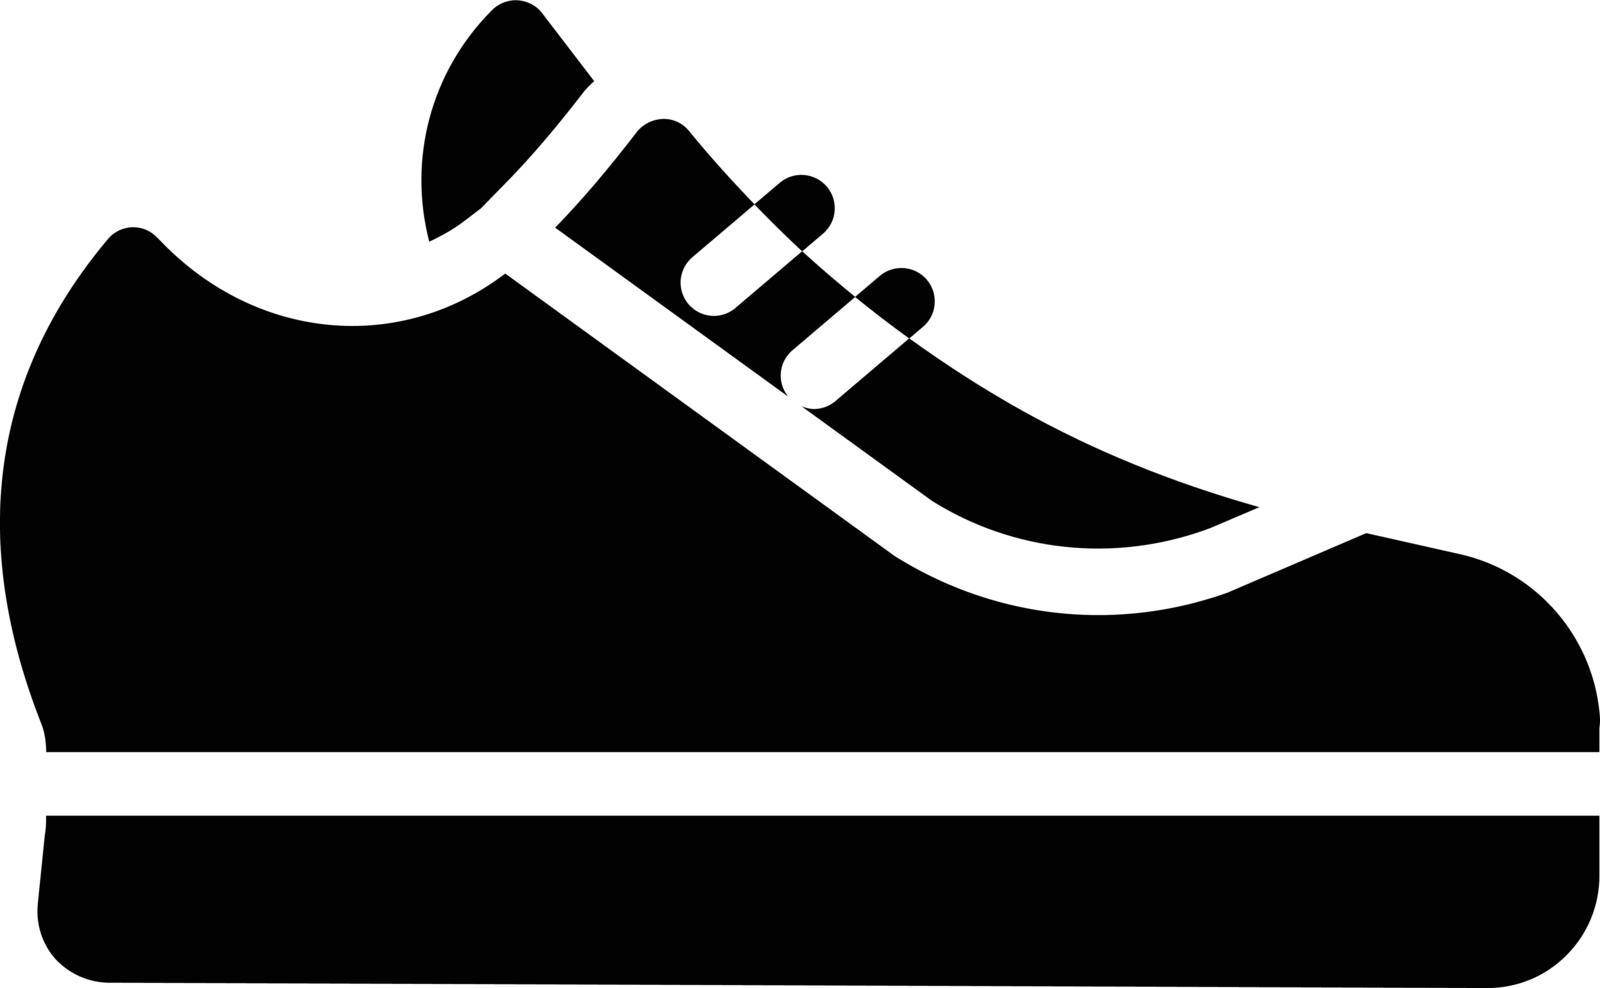 footwear Vector illustration on a transparent background. Premium quality symmbols. Glyphs vector icons for concept and graphic design.